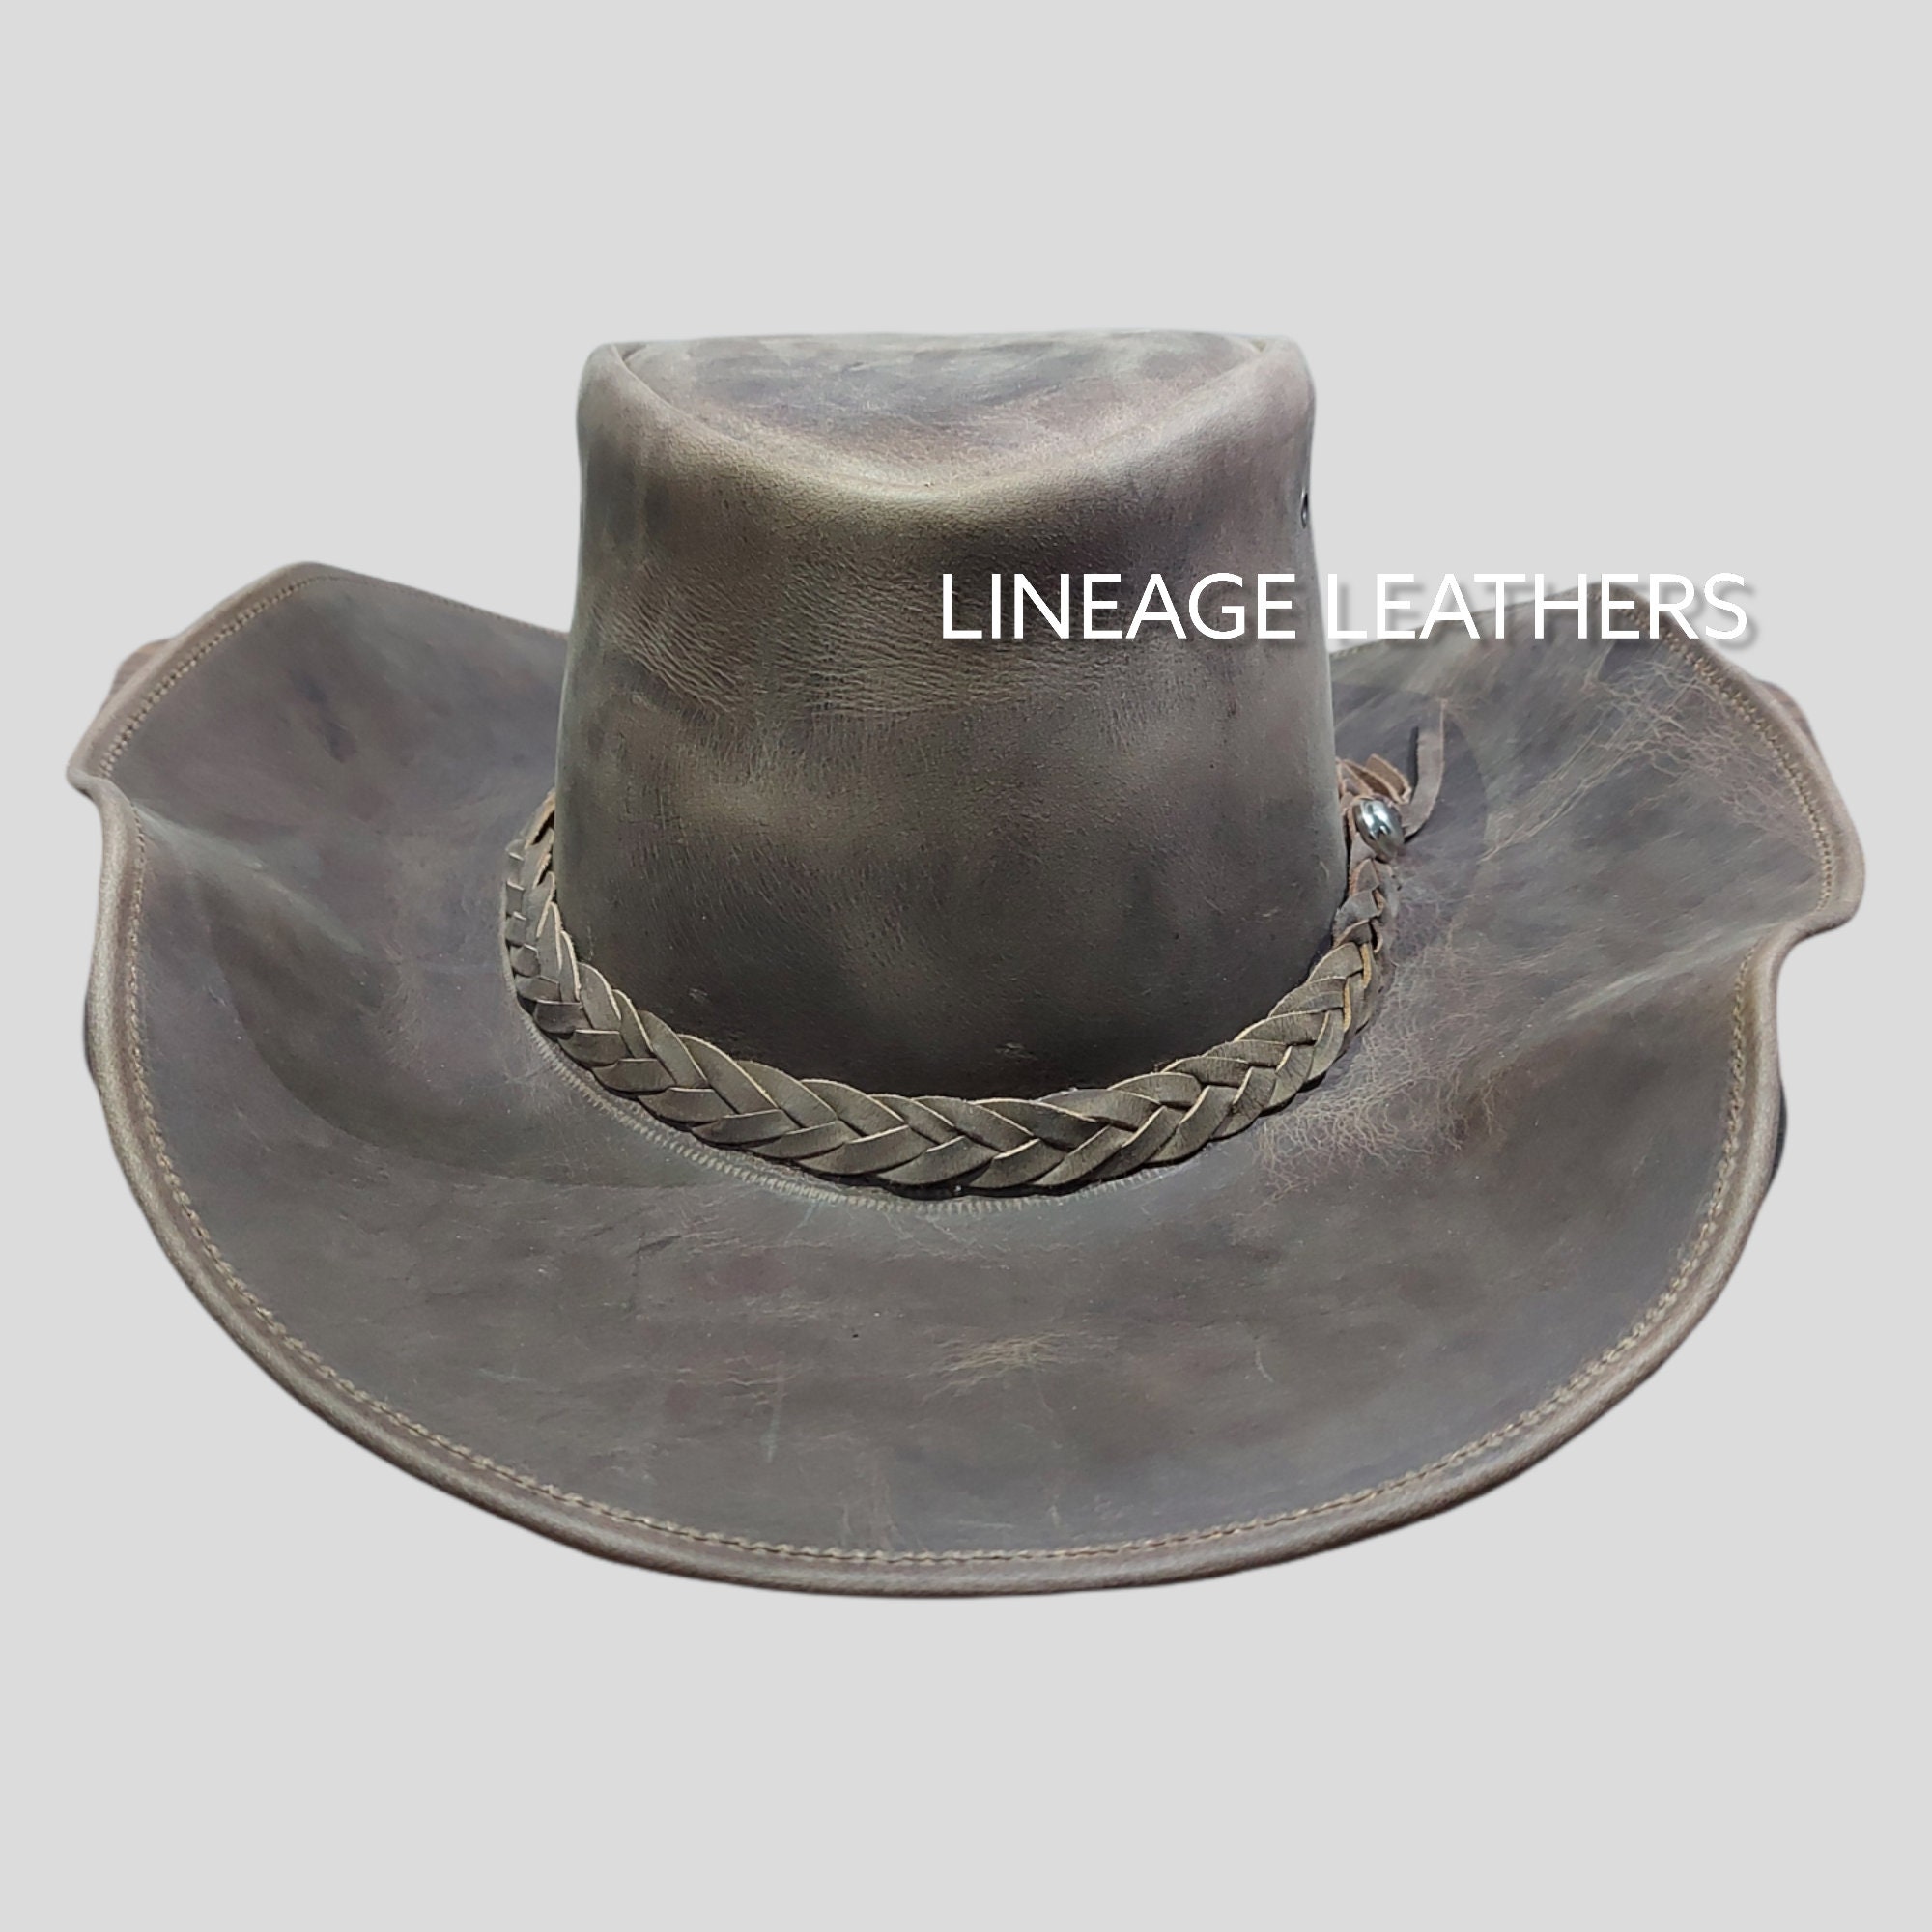 LEATHER Cowboy HAT【oZtrALa】Australian Outback Aussie, 52% OFF